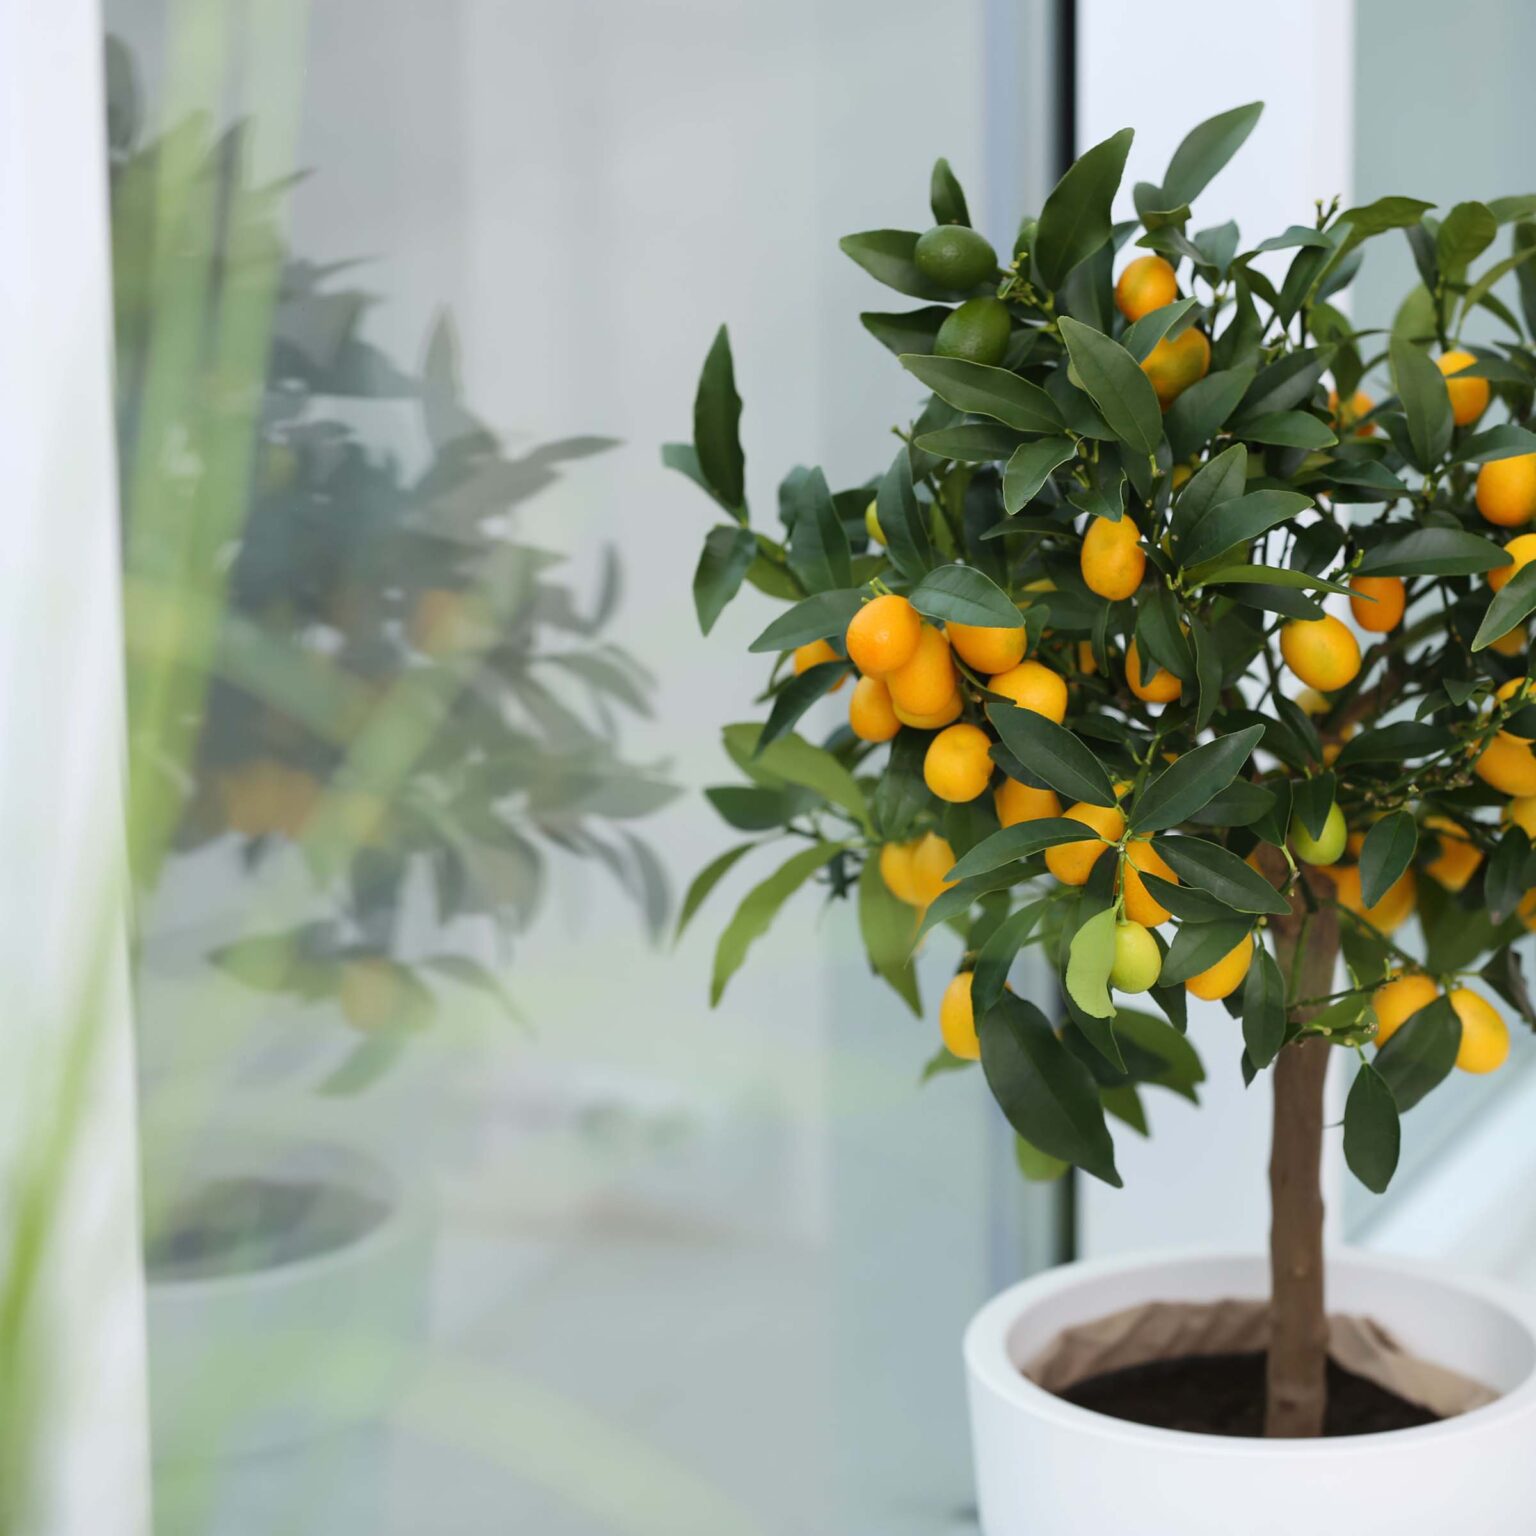 Are you looking to add something unique to your garden? Dive into the details about rare and exotic fruit trees that you can plant at home!